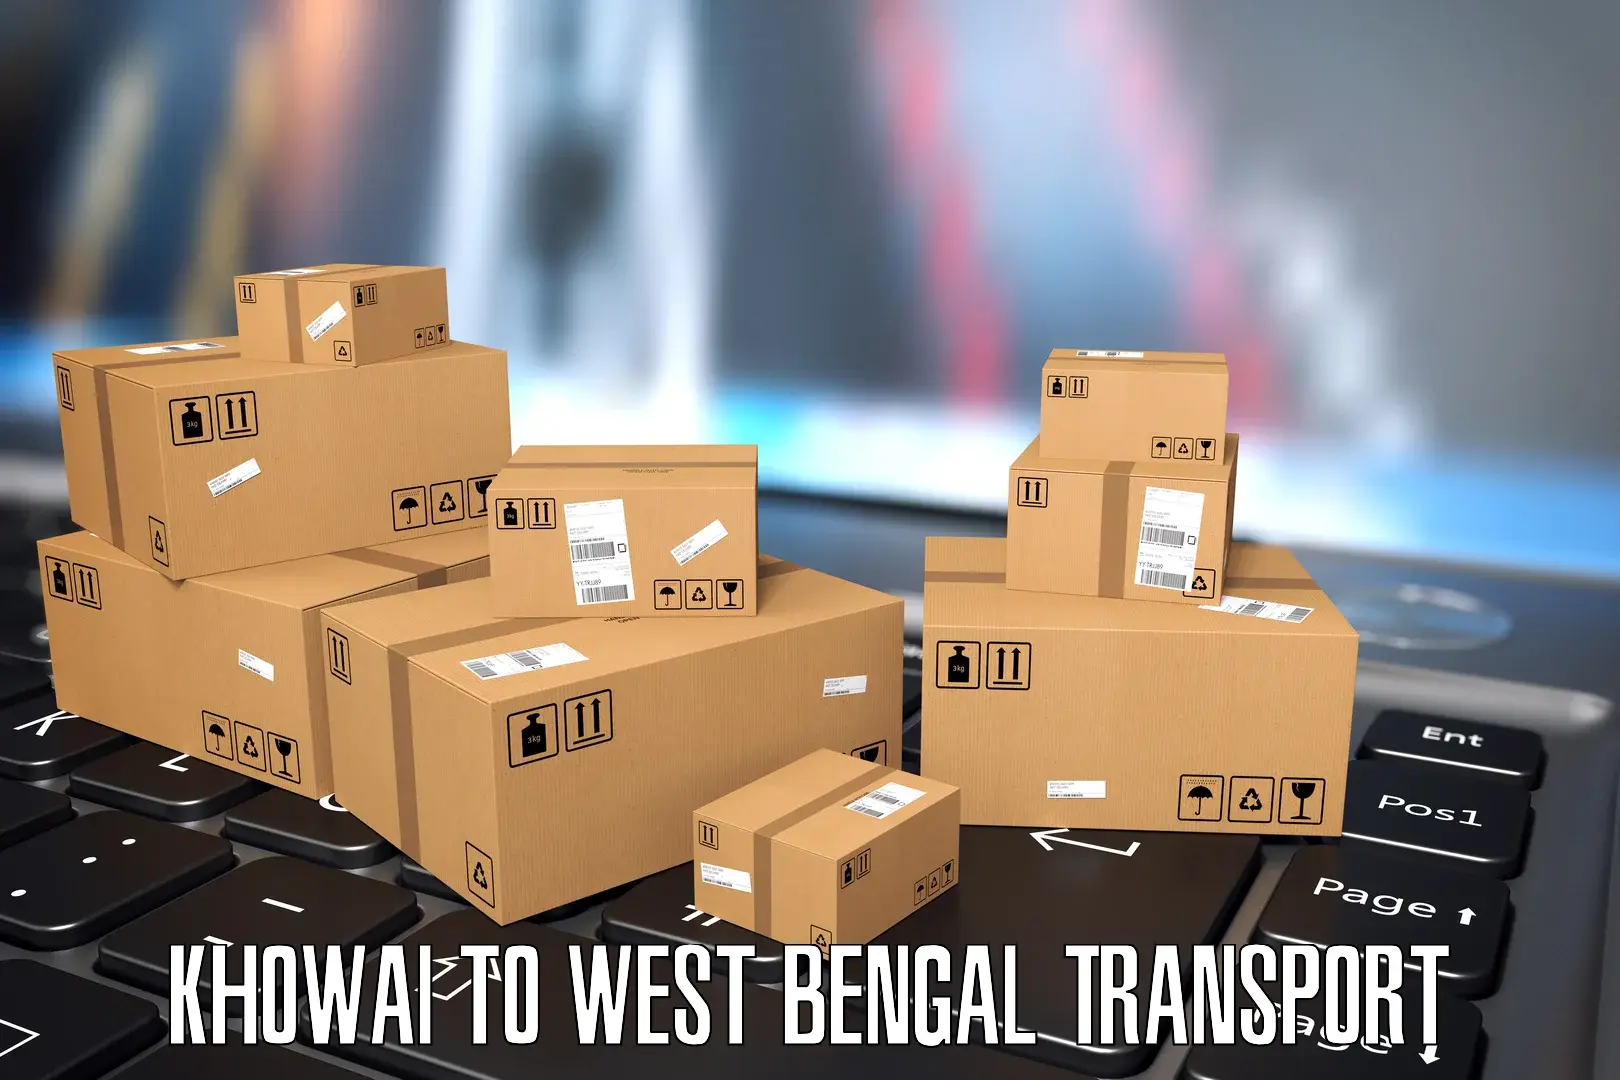 Nationwide transport services Khowai to West Bengal